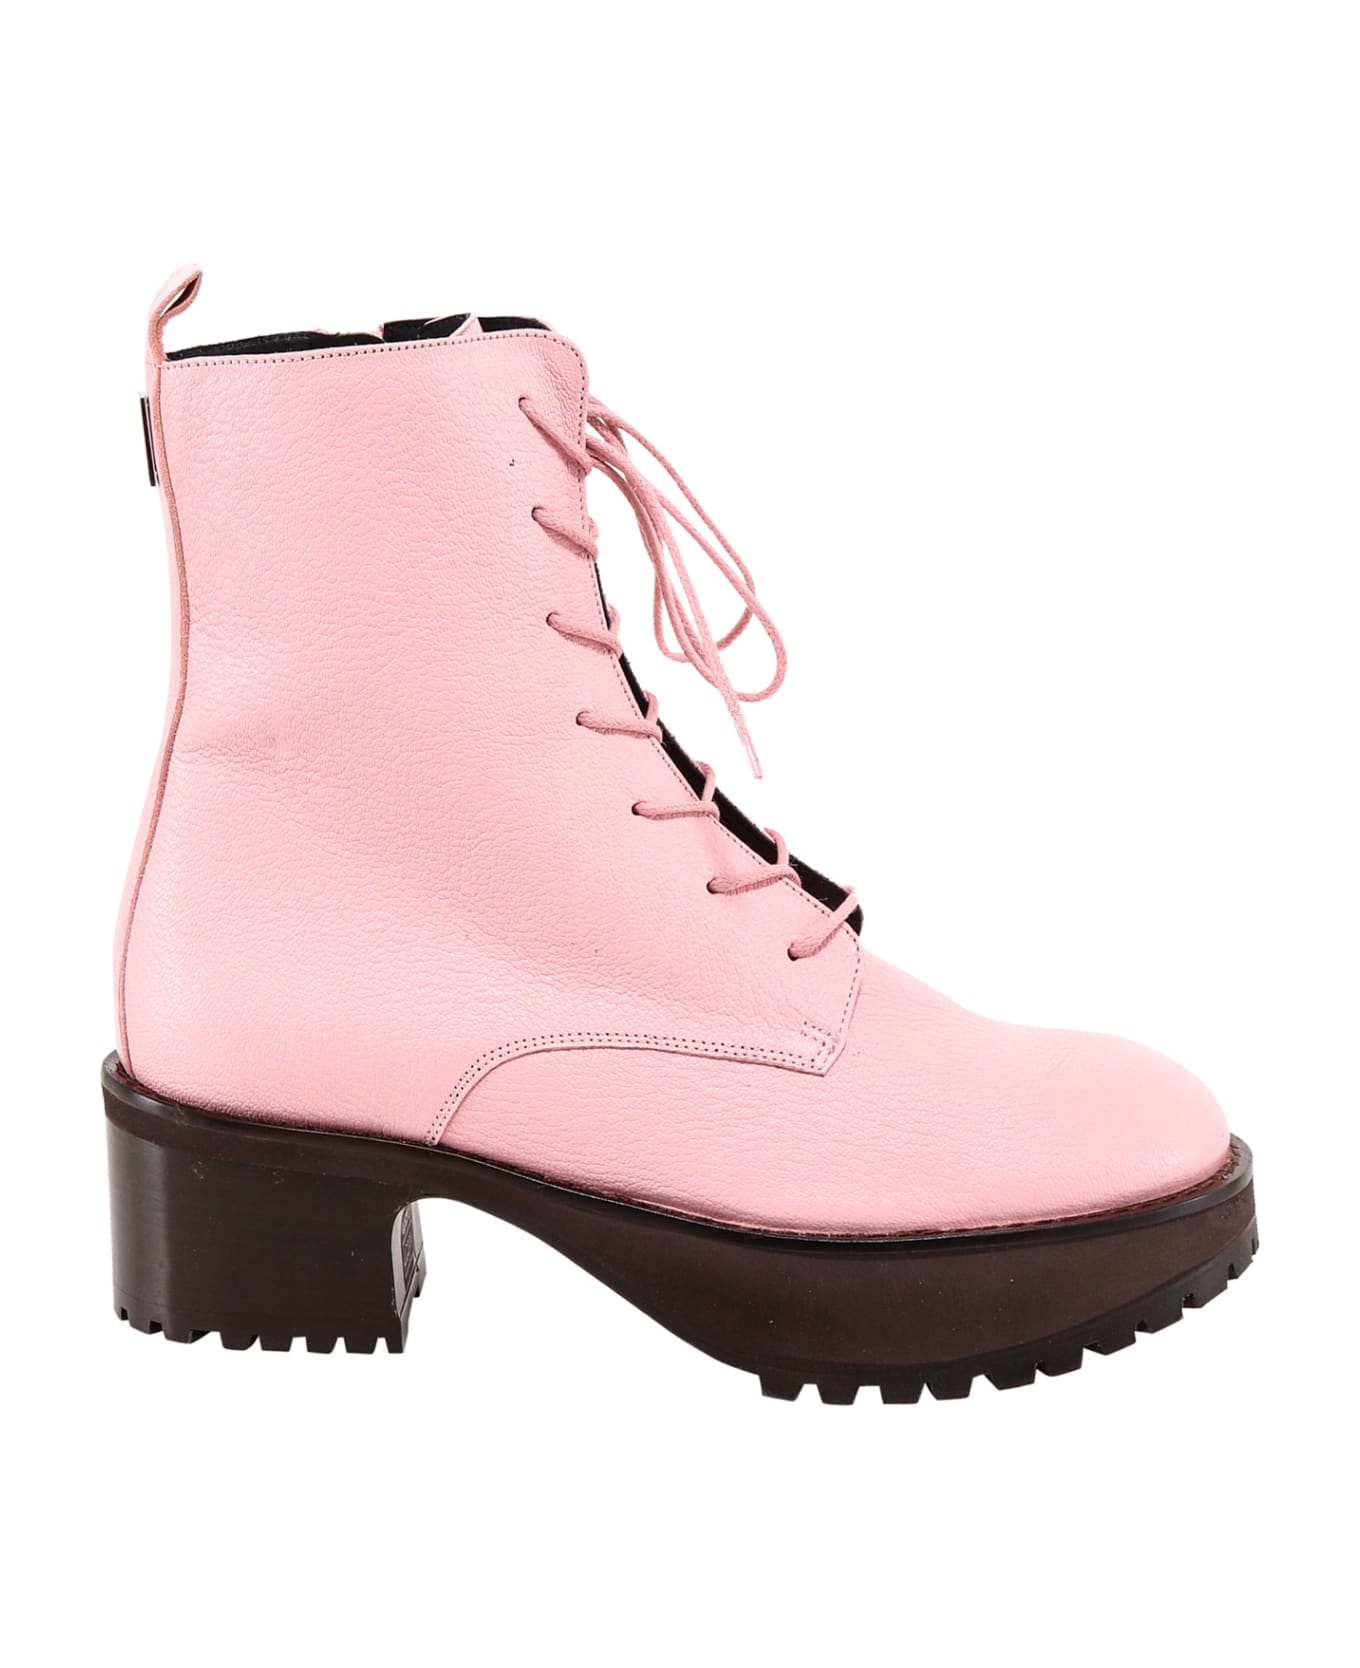 BY FAR Ankle Boots - Pink ブーツ